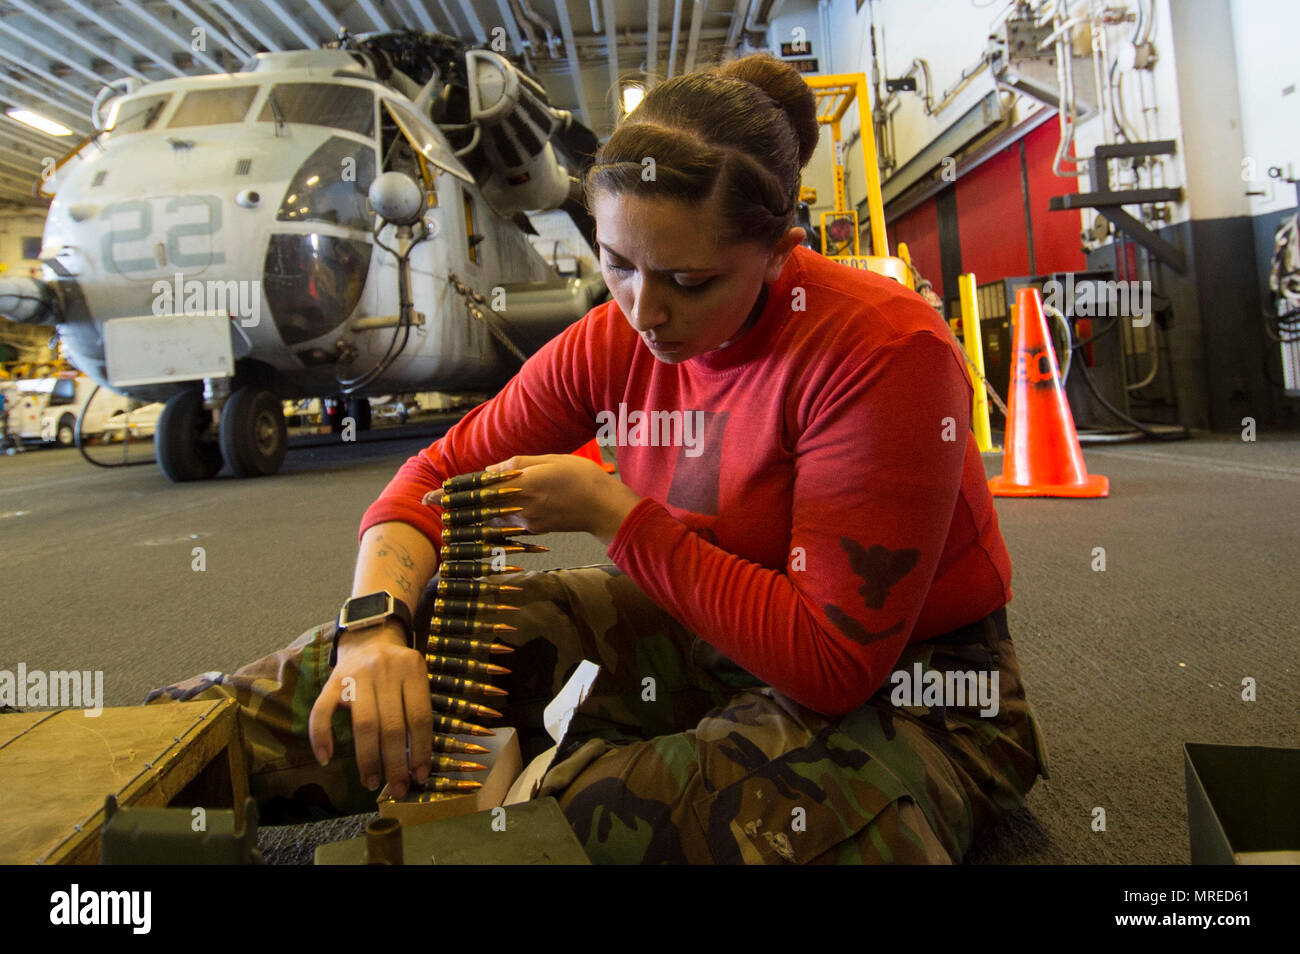 170611-N-DL434-222 PHILIPPINE SEA (June 11, 2017) Aviation Ordnanceman 3rd Class Justina Myrick, from Ft. Collins, Colo., loads an ammunition crate following a live fire exercise aboard the amphibious assault ship USS Bonhomme Richard (LHD 6). Bonhomme Richard, flagship of the Bonhomme Richard Amphibious Ready Group, is operating in the Indo-Asia-Pacific region to serve as a forward-capability for any type of contingency. (U.S. Navy photo by Mass Communication Specialist Seaman Apprentice Gavin Shields/Released) Stock Photo